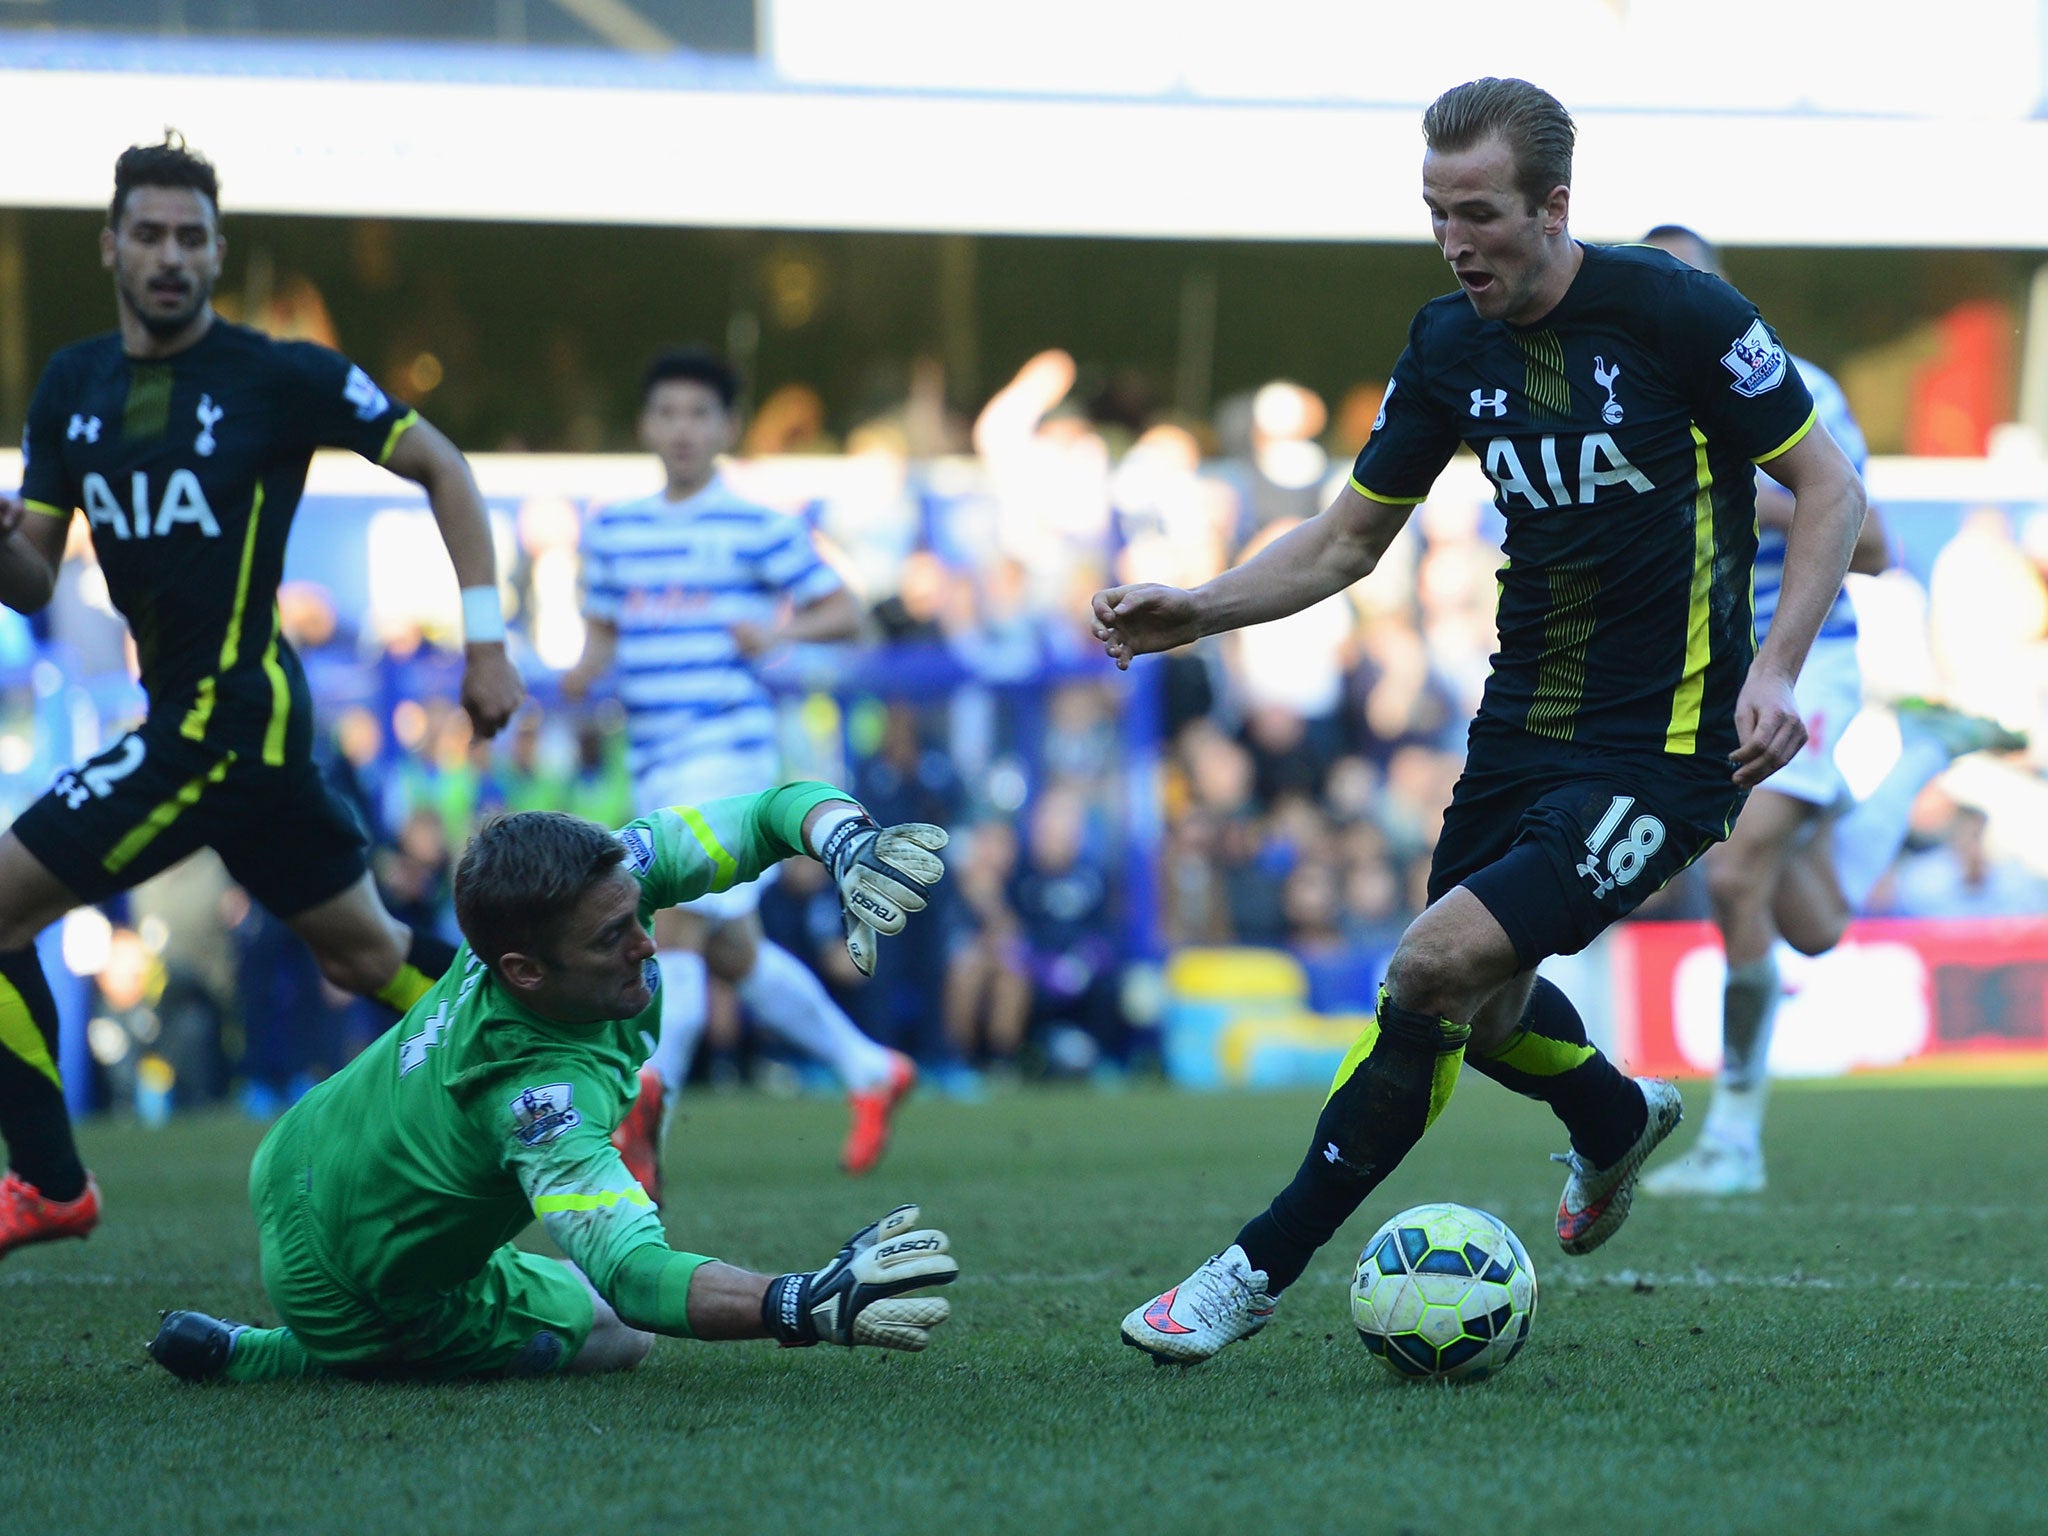 Harry Kane takes the ball around Robert Green to score his second